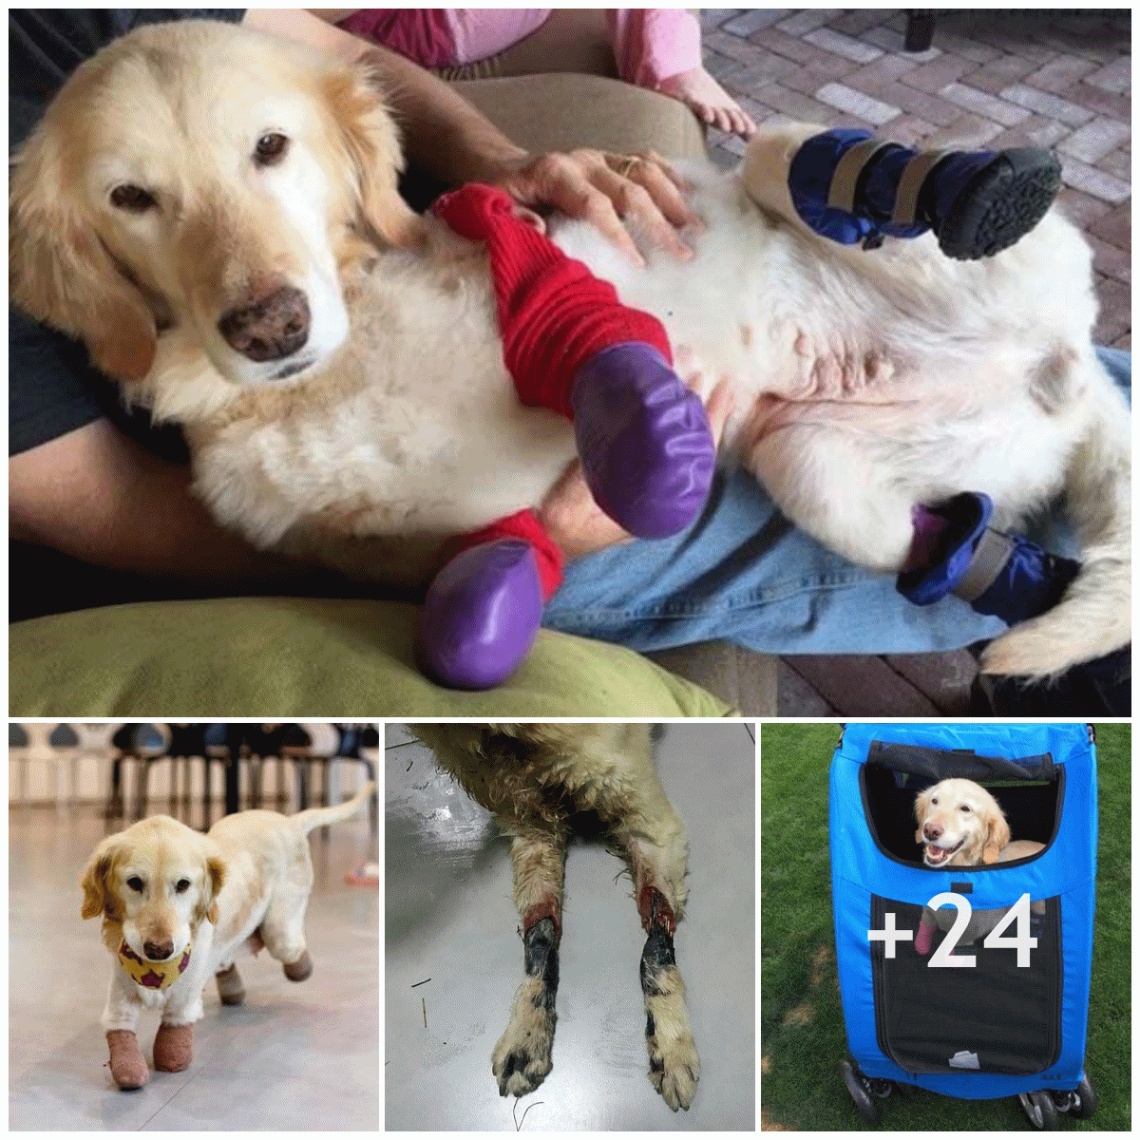 The dog lost 4 legs due to an accident, but in the end he made his family happy.